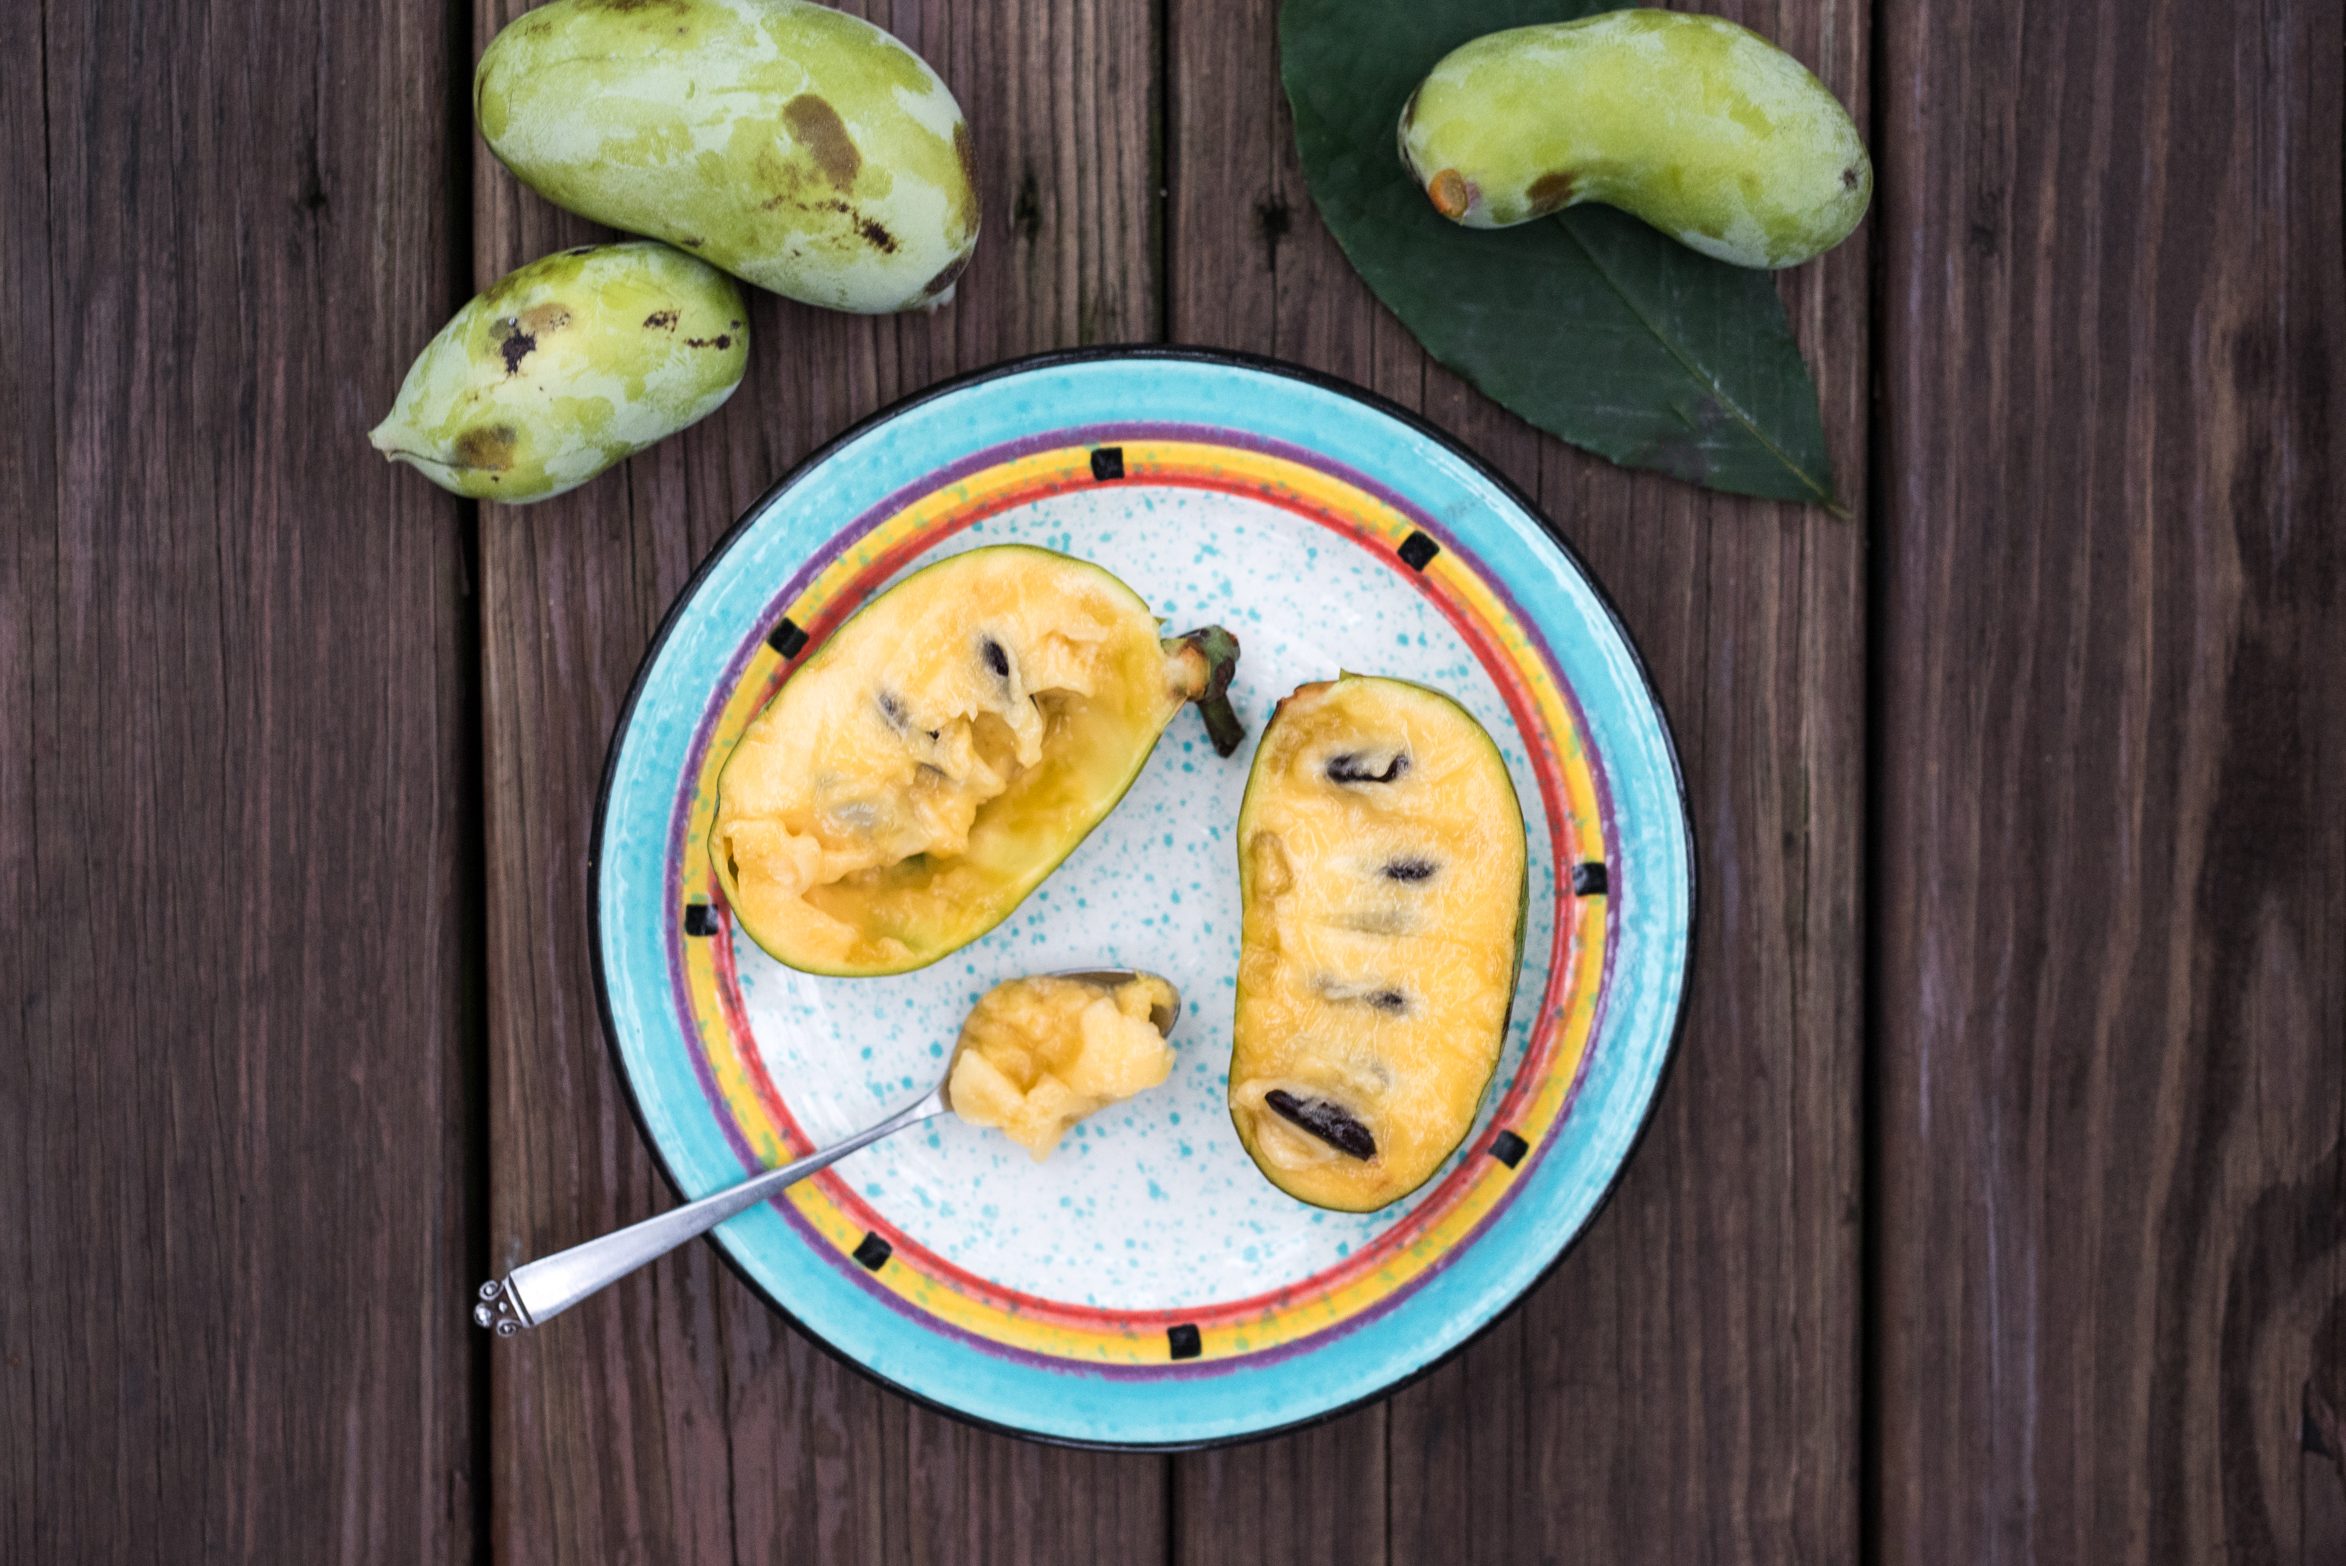 Where buy pawpaws in Philly the season ends